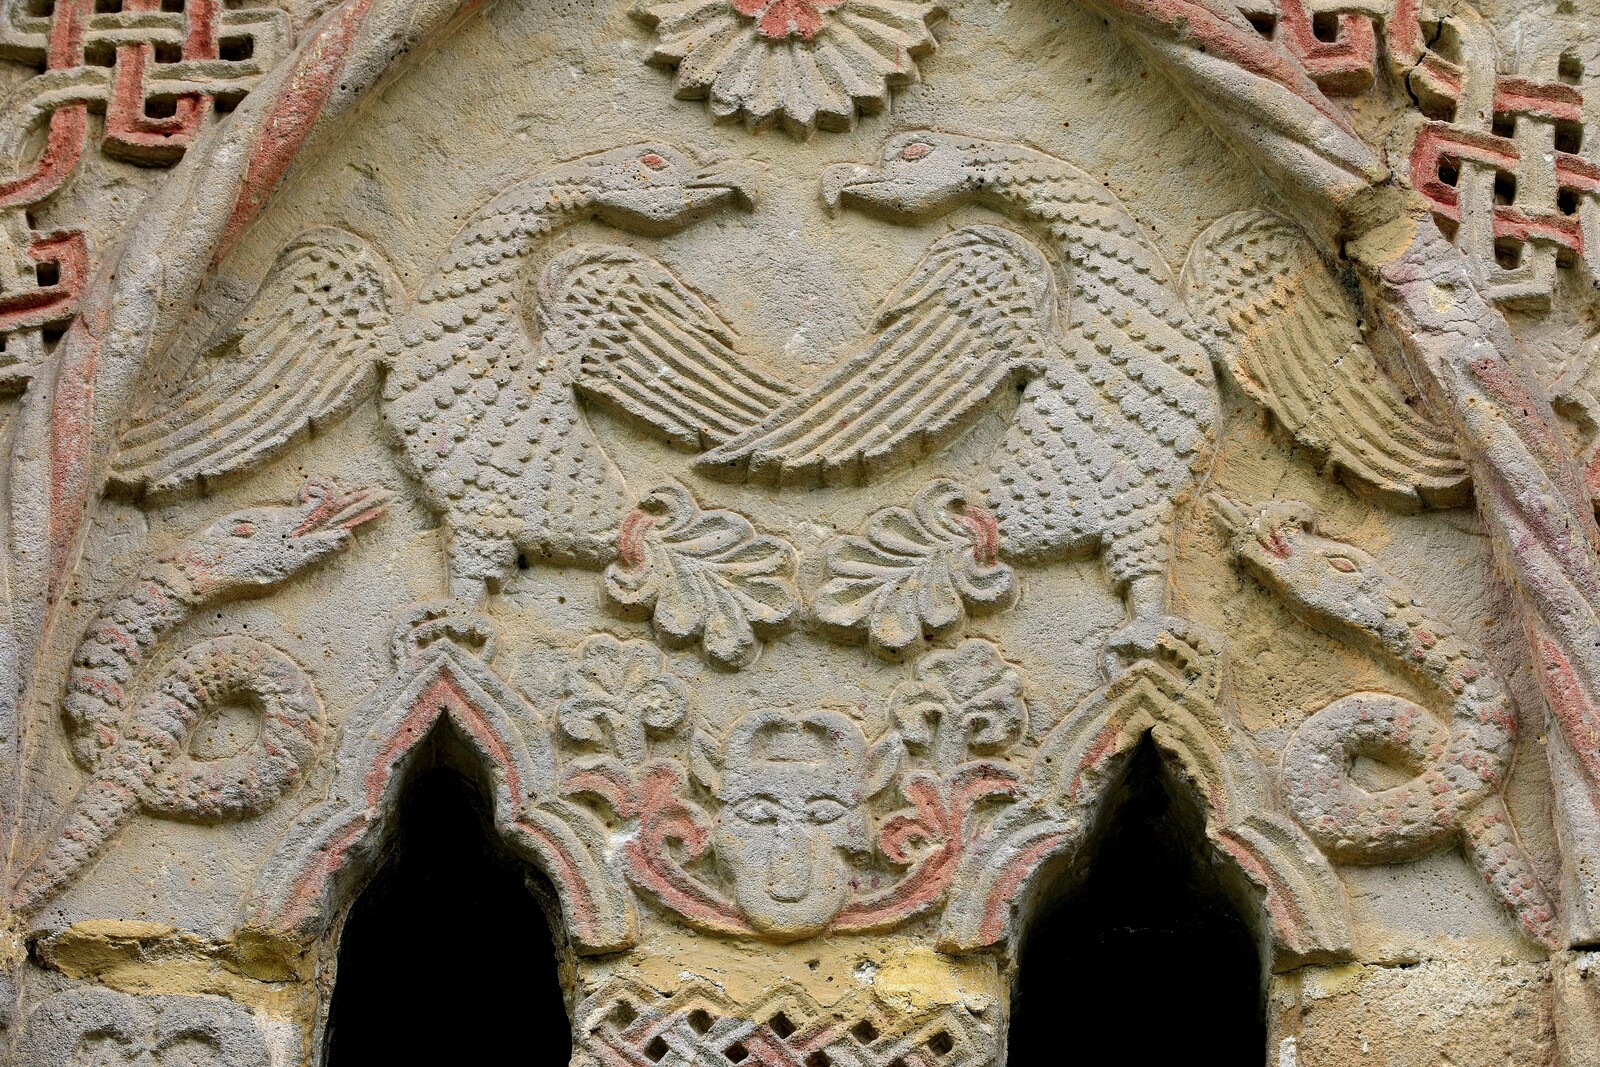 Bifora on the Еast Part of the North Wall with a Representation of Eagles and Snakes, detail